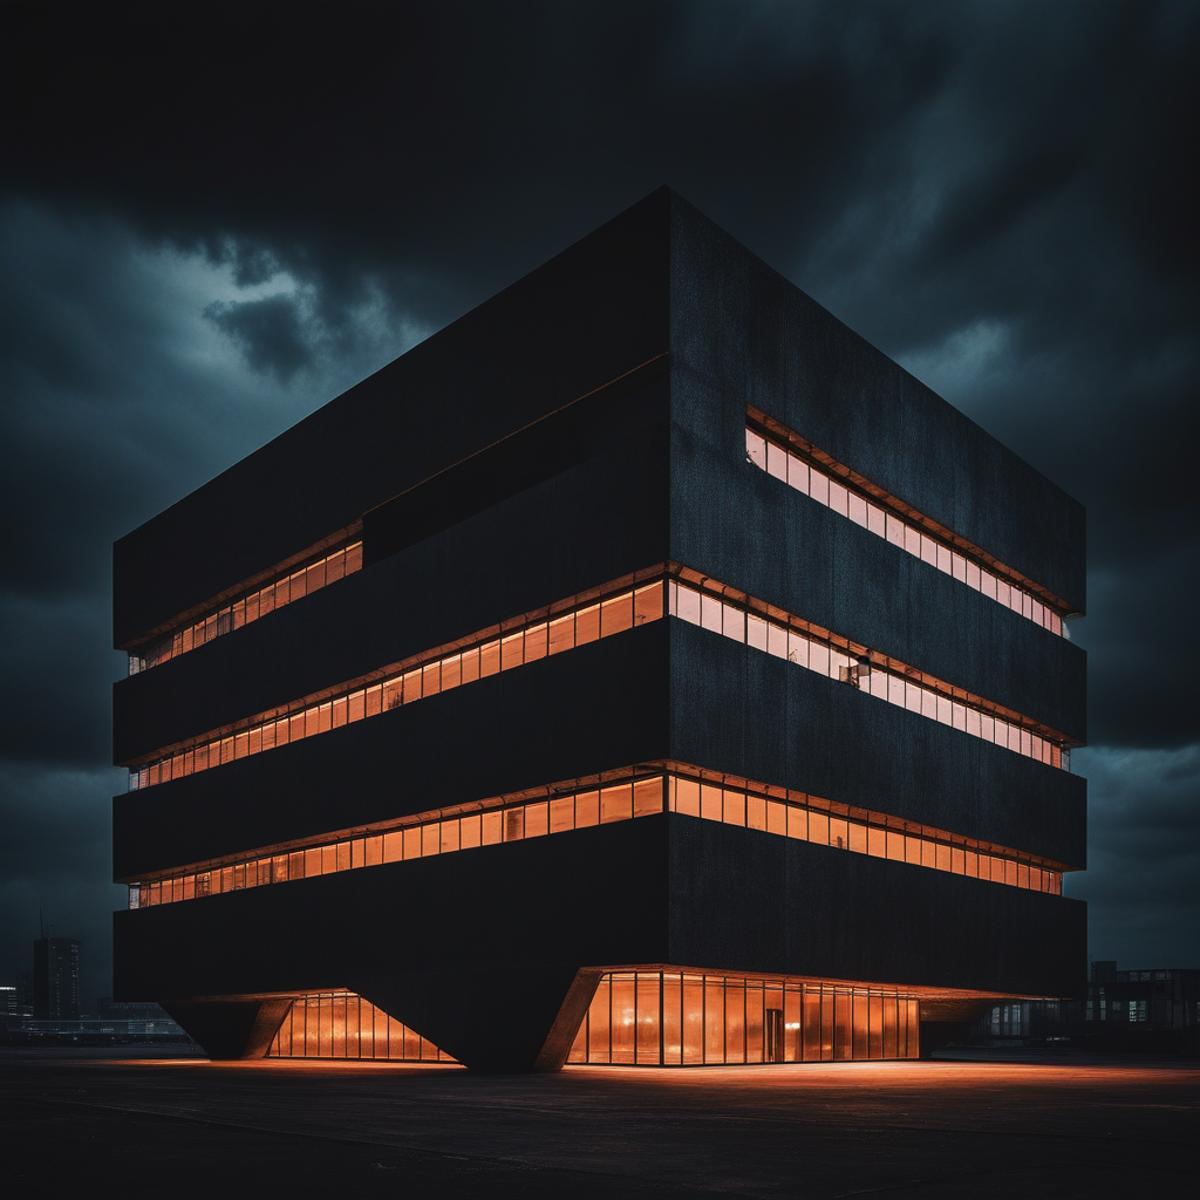 A dark building with many windows stands tall with a dark sky above.